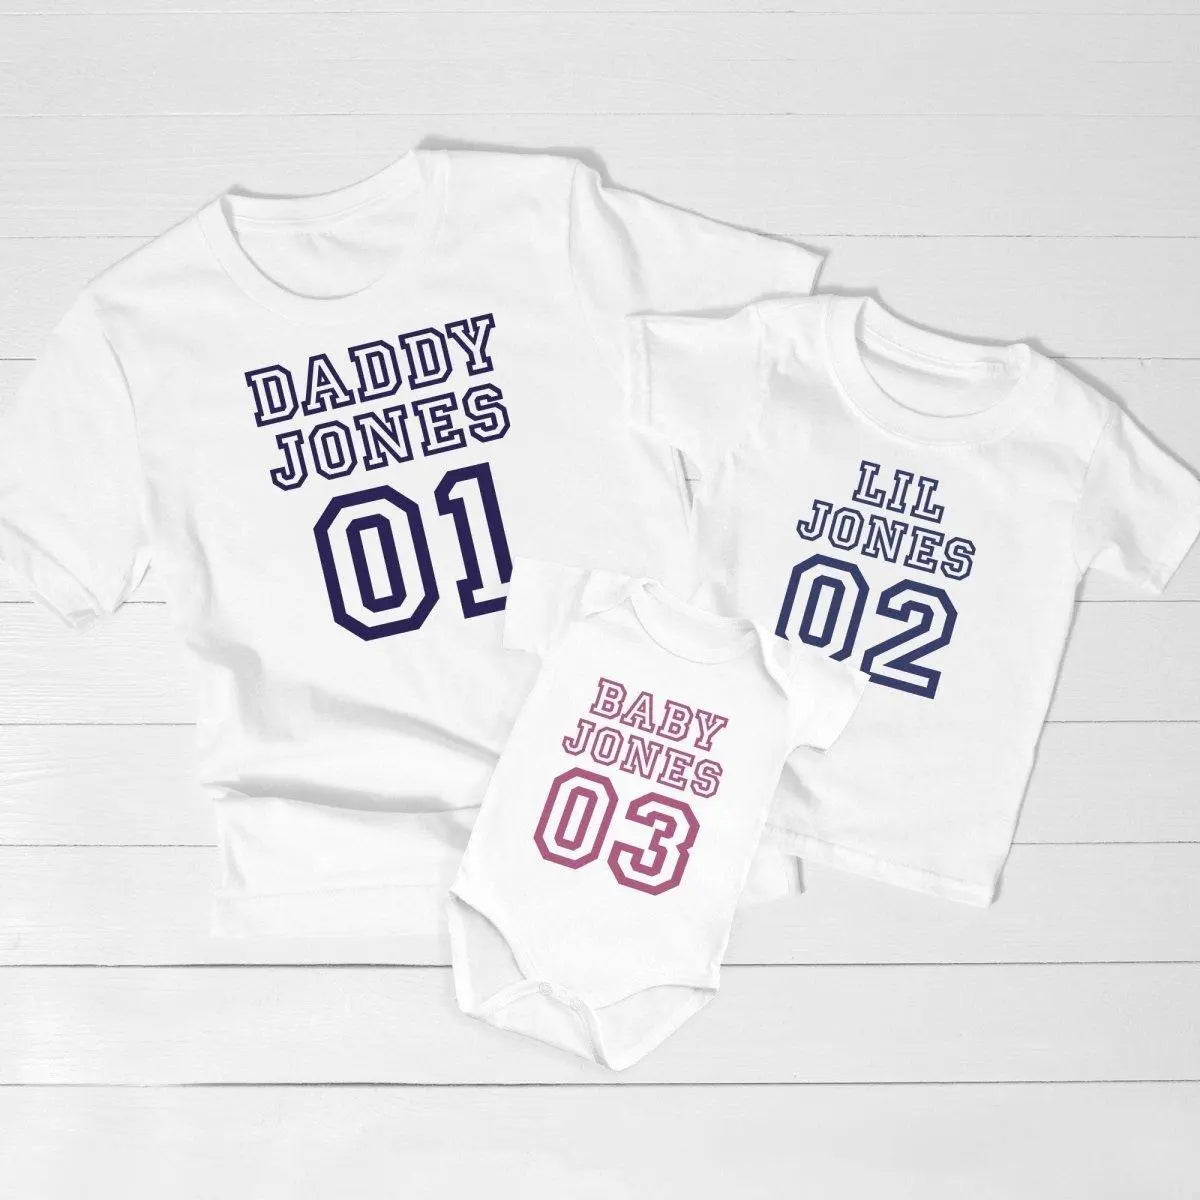 Personalised Fathers Day T-shirt, Matching Family Soccer T-shirts, Father and Son Matching Tops, Father Daughter Shirts, Football T-shirt - Amy Lucy